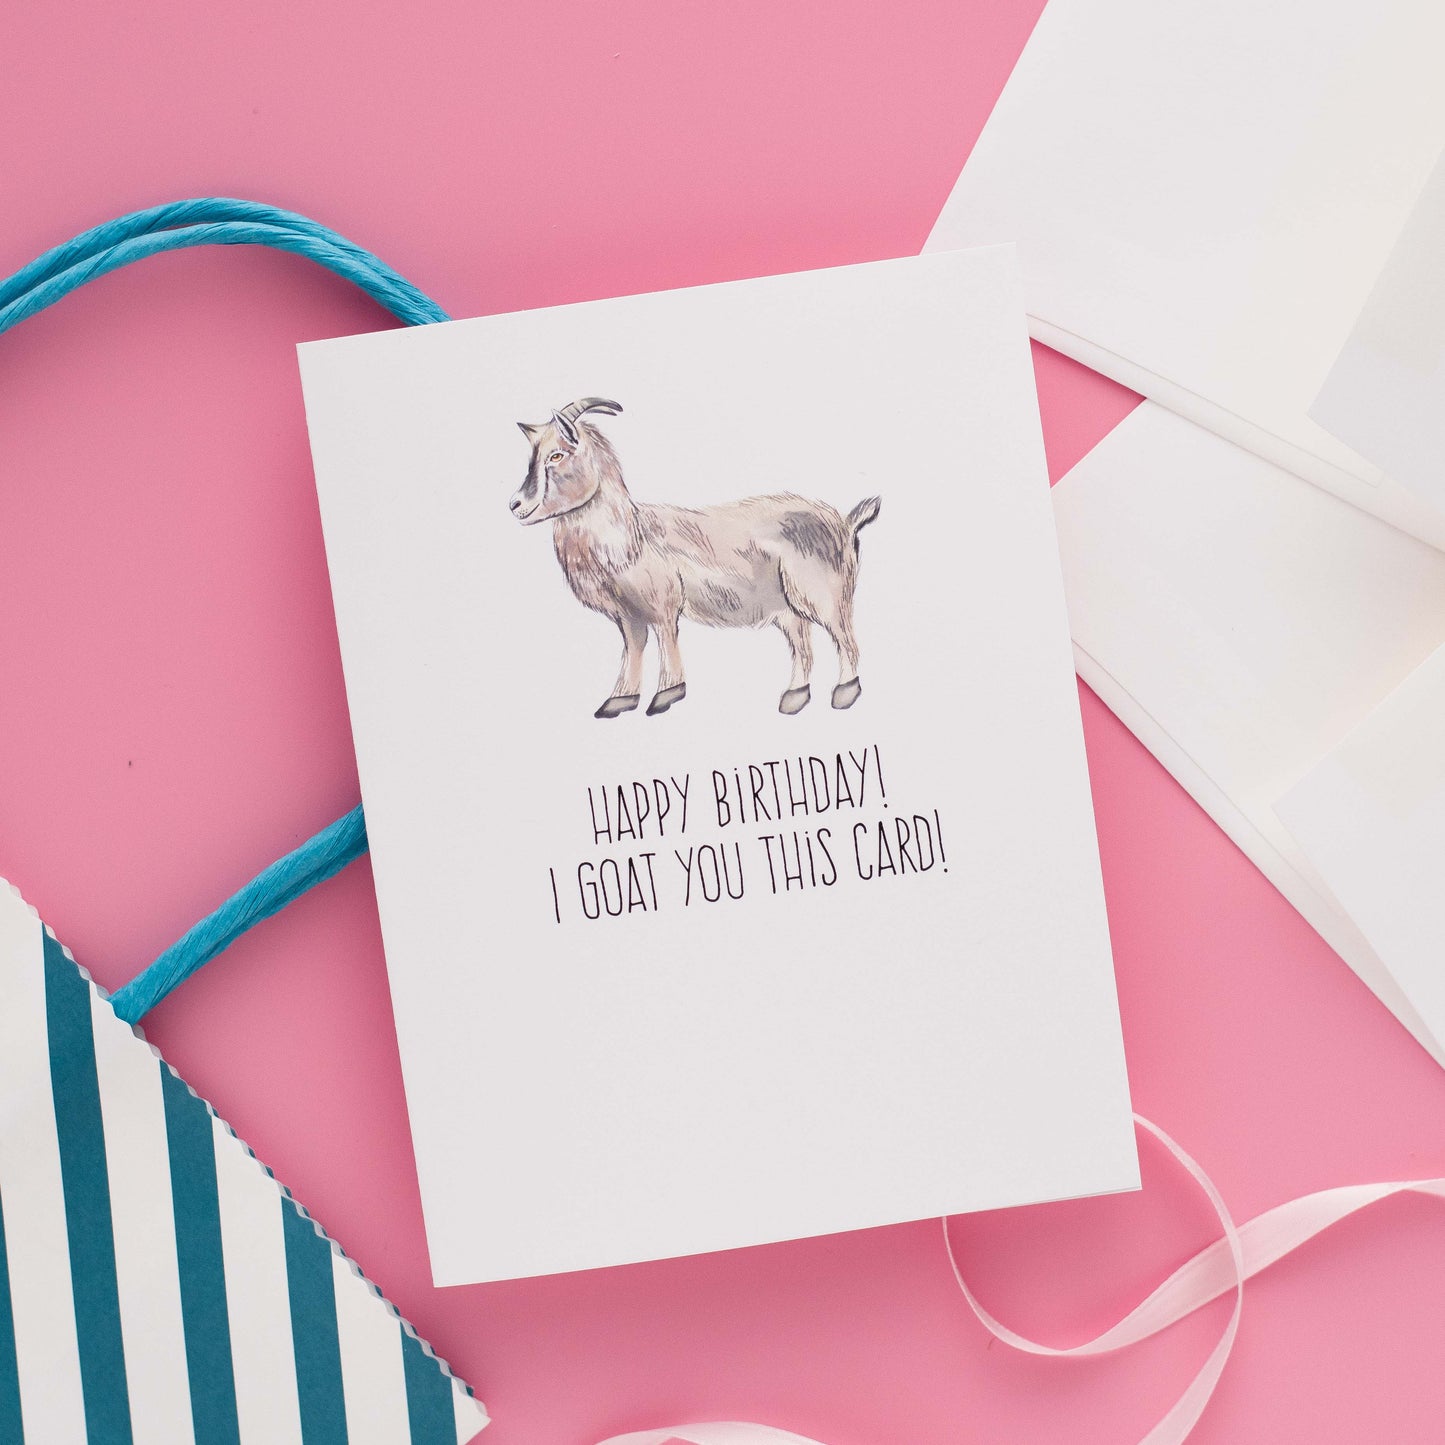 Happy Birthday! I Goat You This Card! - Greeting Card